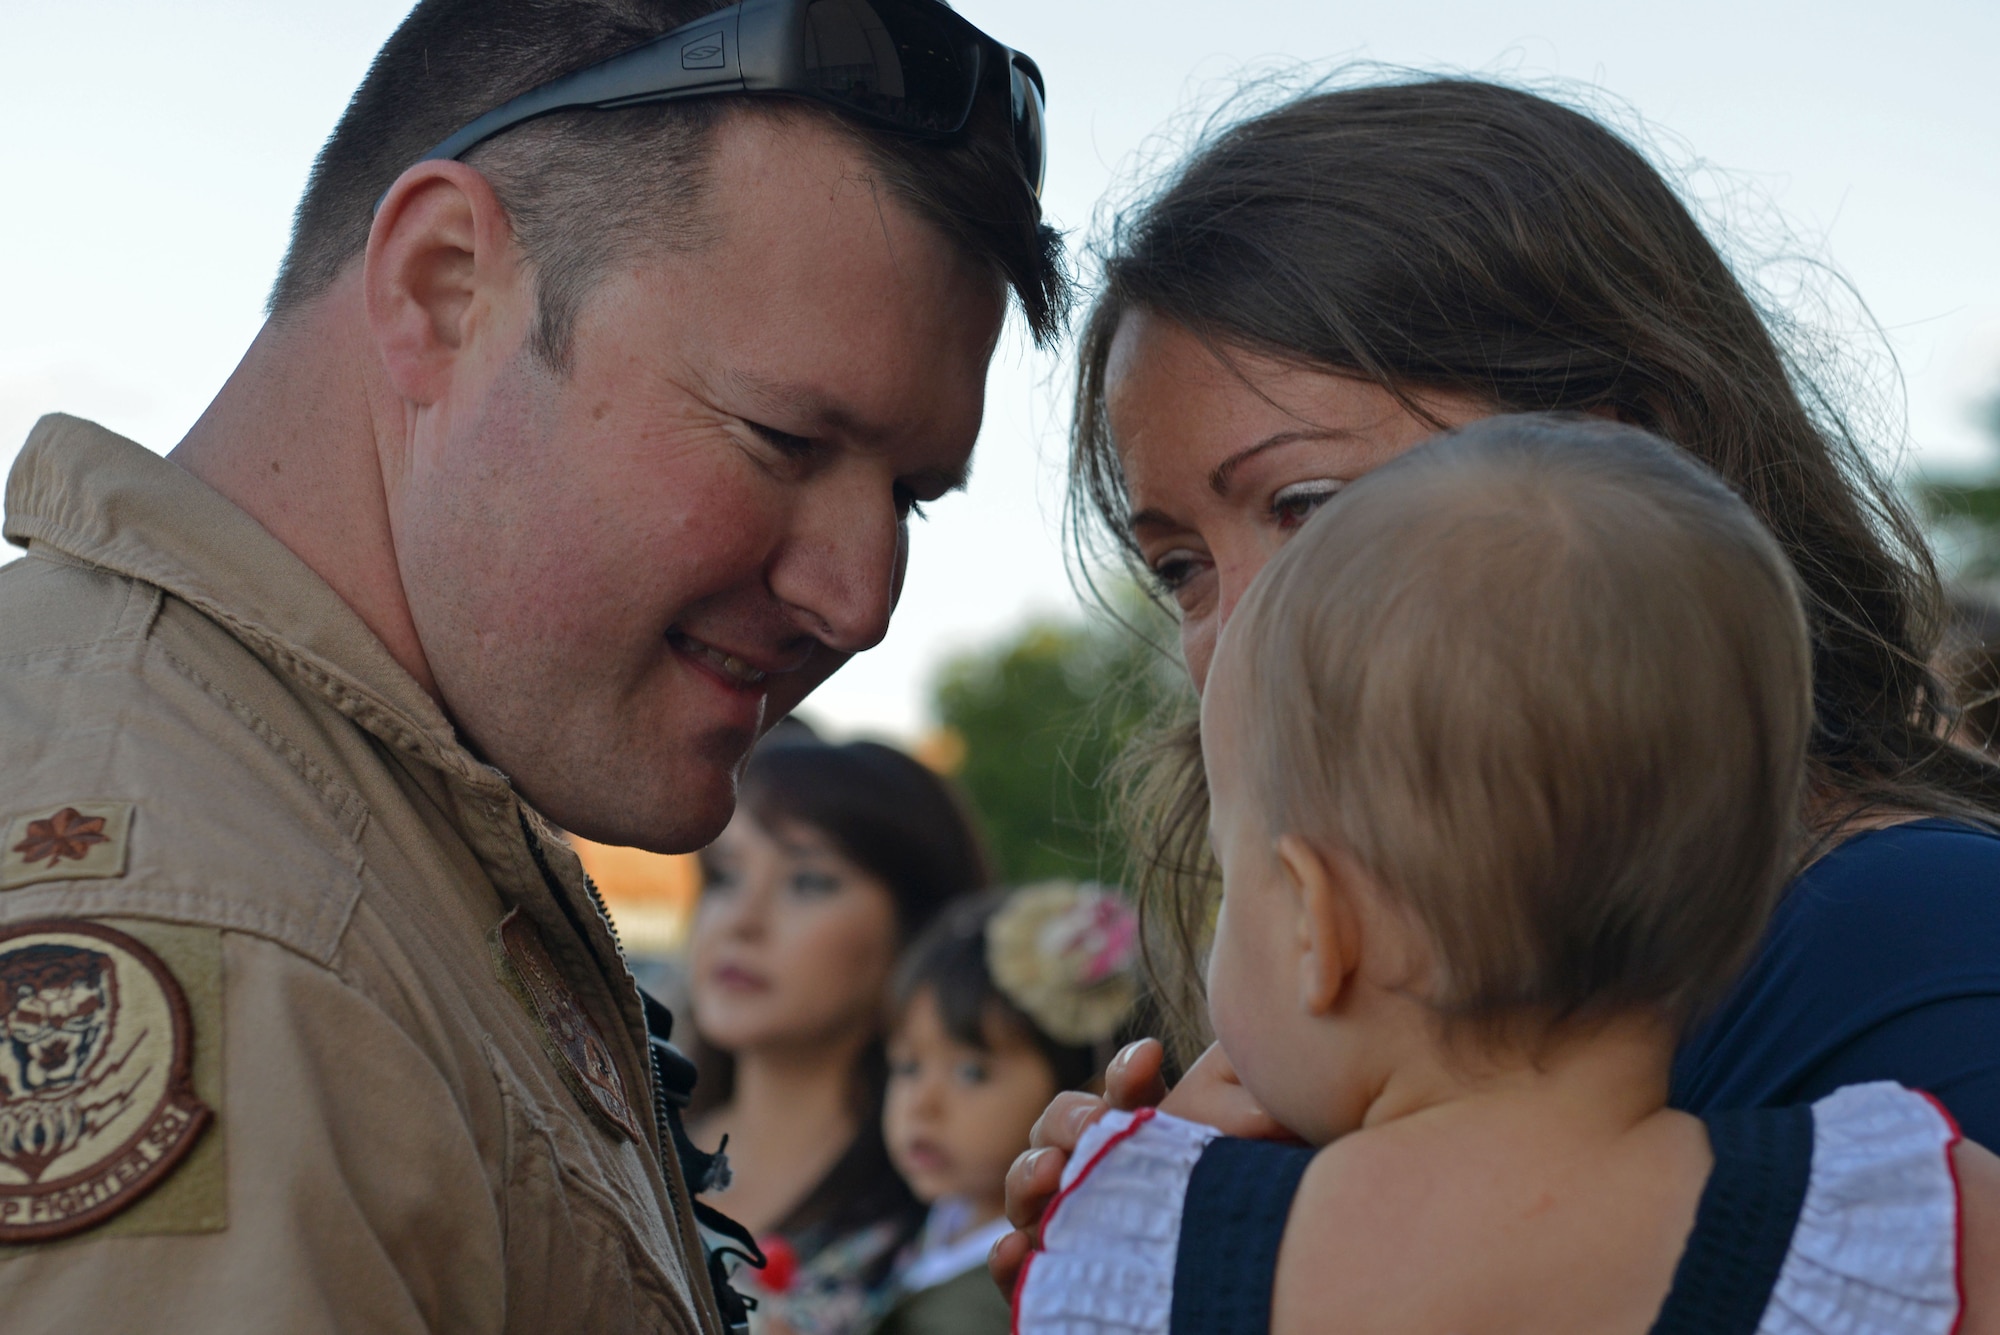 A U.S. Airman assigned to the 79th Fighter Squadron smiles at his child after returning to Shaw Air Force Base, S.C., May 5, 2017. Airmen returned after a six-month deployment to the United States Central Command area of responsibility. (U.S. Air Force photo by Airman 1st Class Destinee Sweeney)